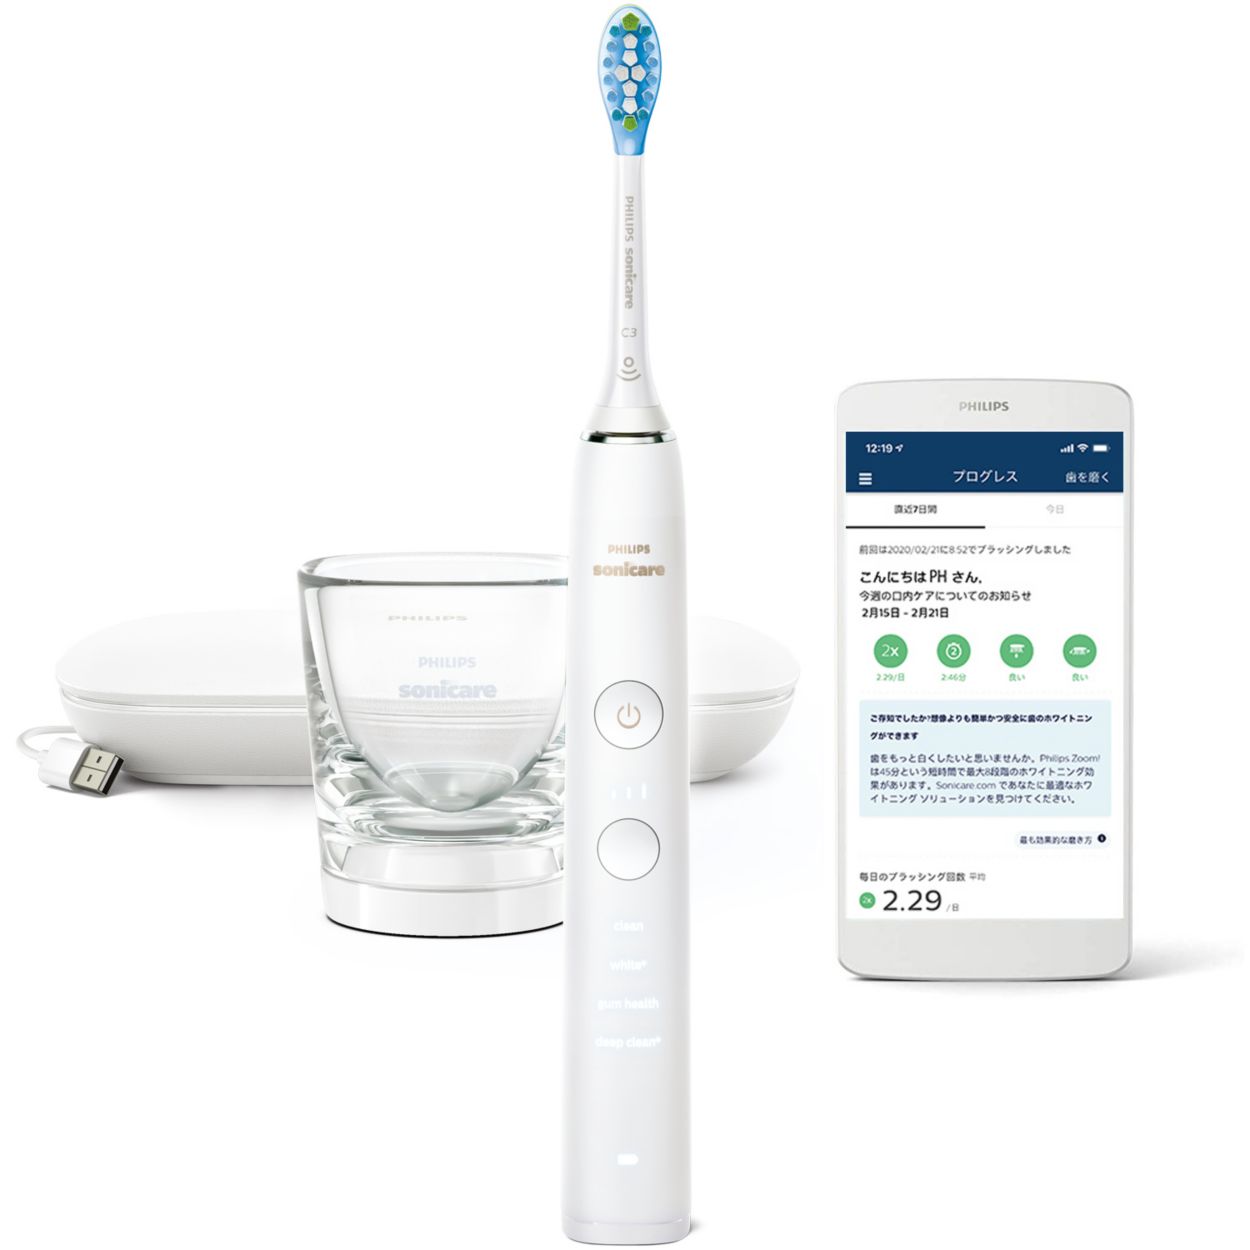 DiamondClean 9000 Sonic electric toothbrush with app HX9901/57 